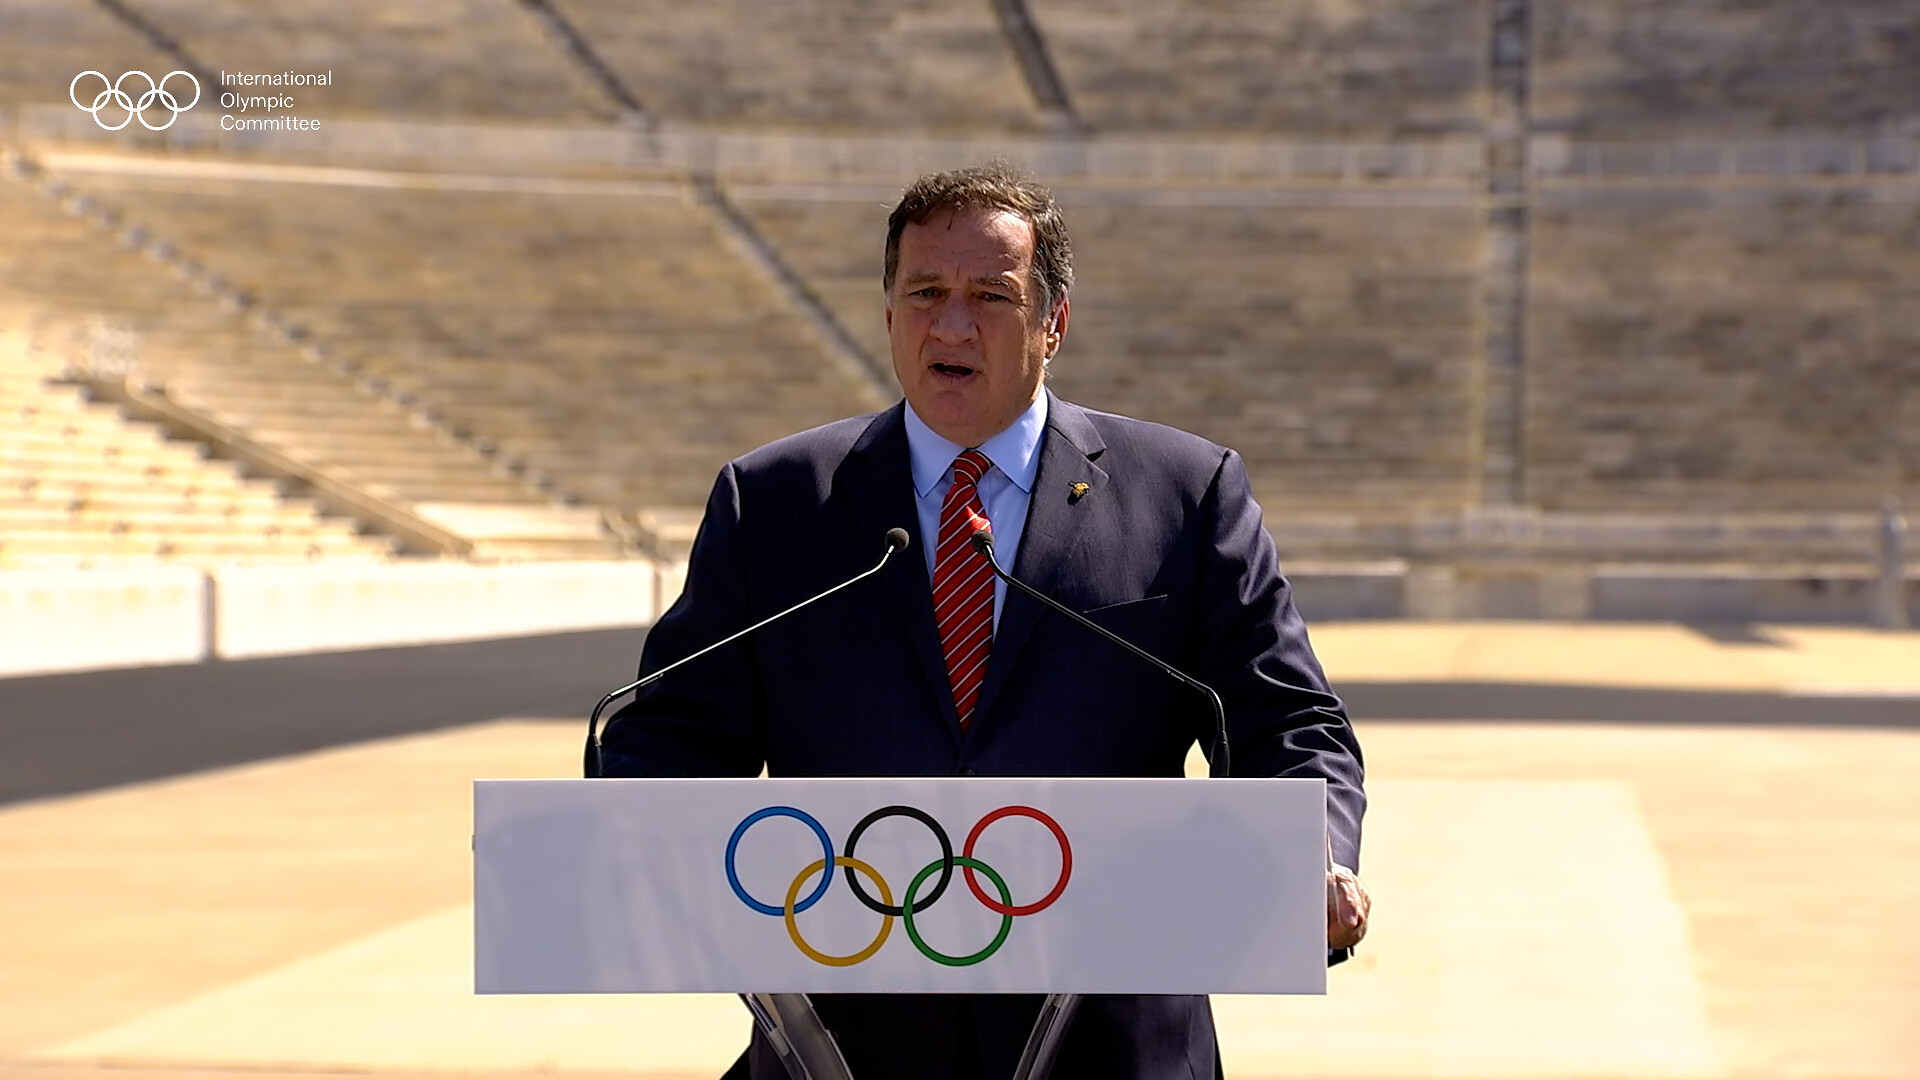 IOC member and HOC President Spyros Capralos was delighted with confirmation that Athens will stage the 2025 IOC Session ©IOC